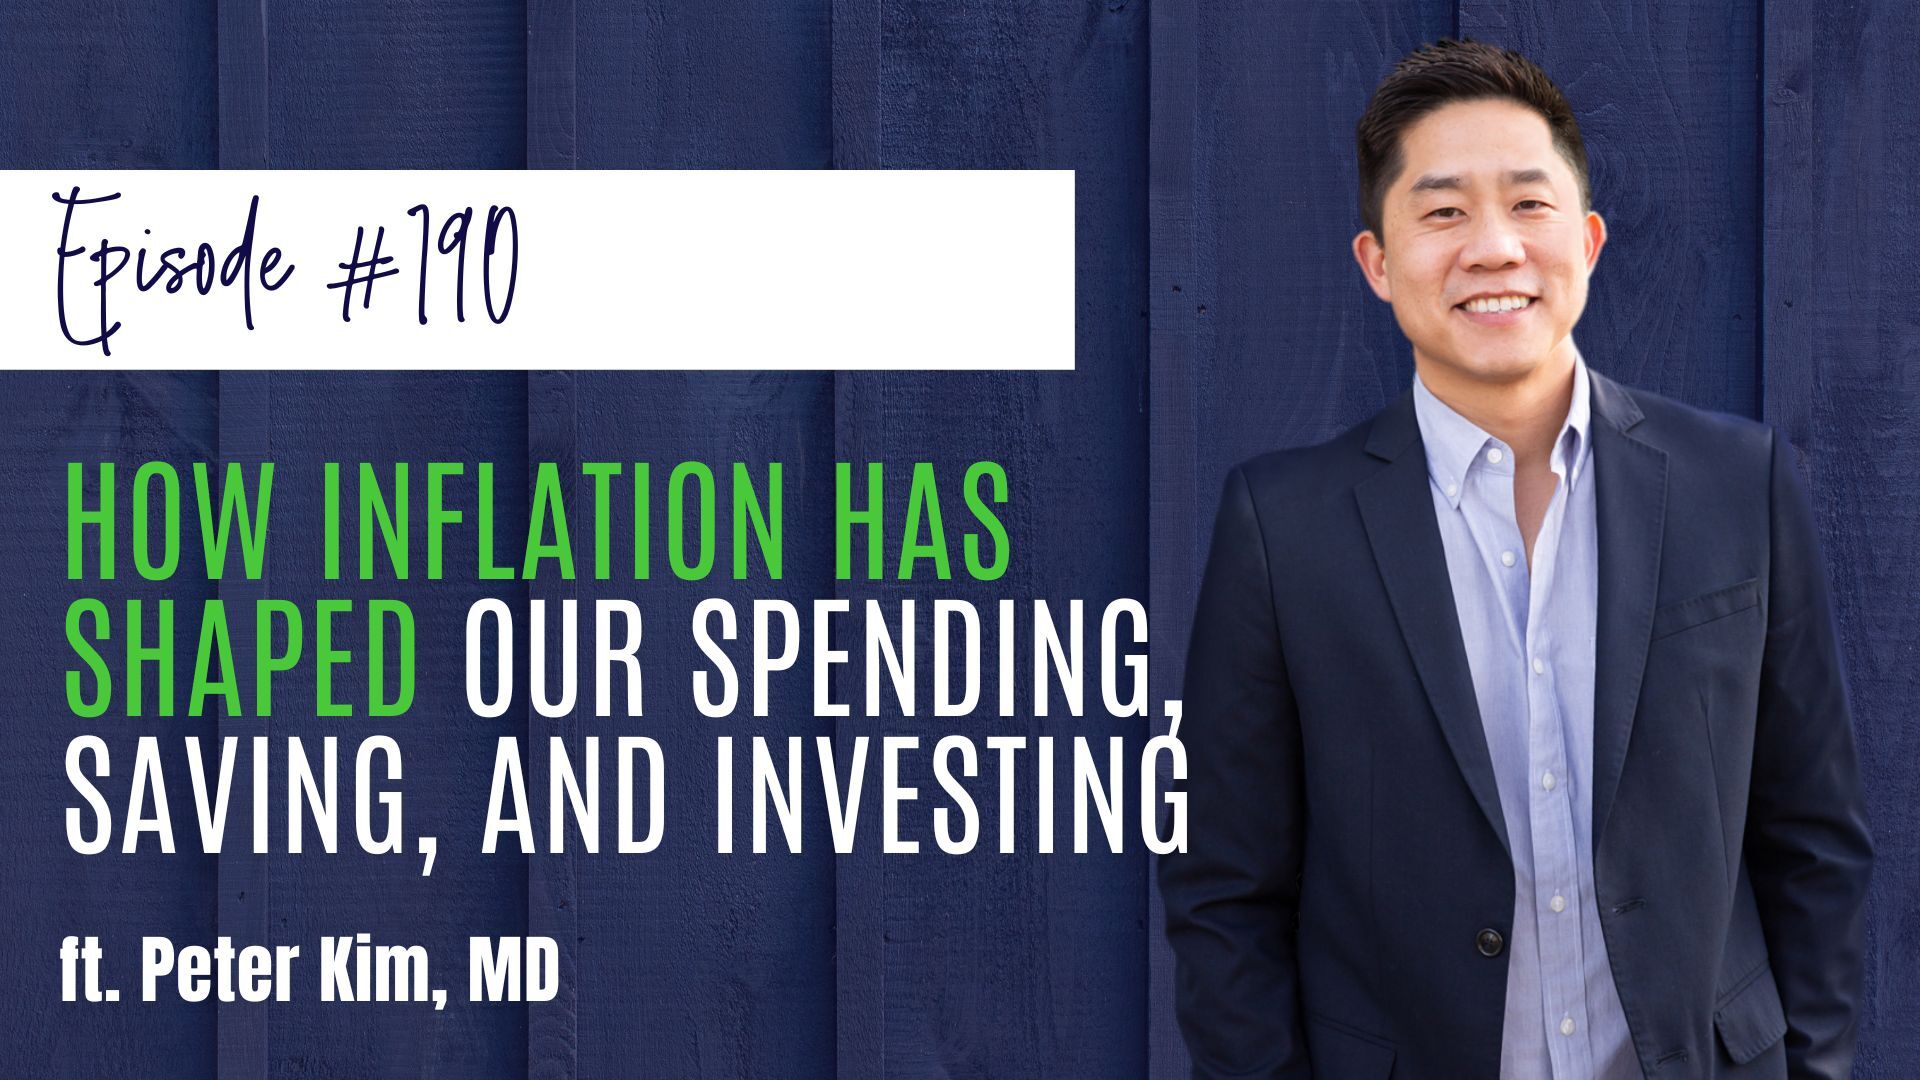 #190 How Inflation Has Shaped our Spending, Saving, and Investing ft. Peter Kim, MD